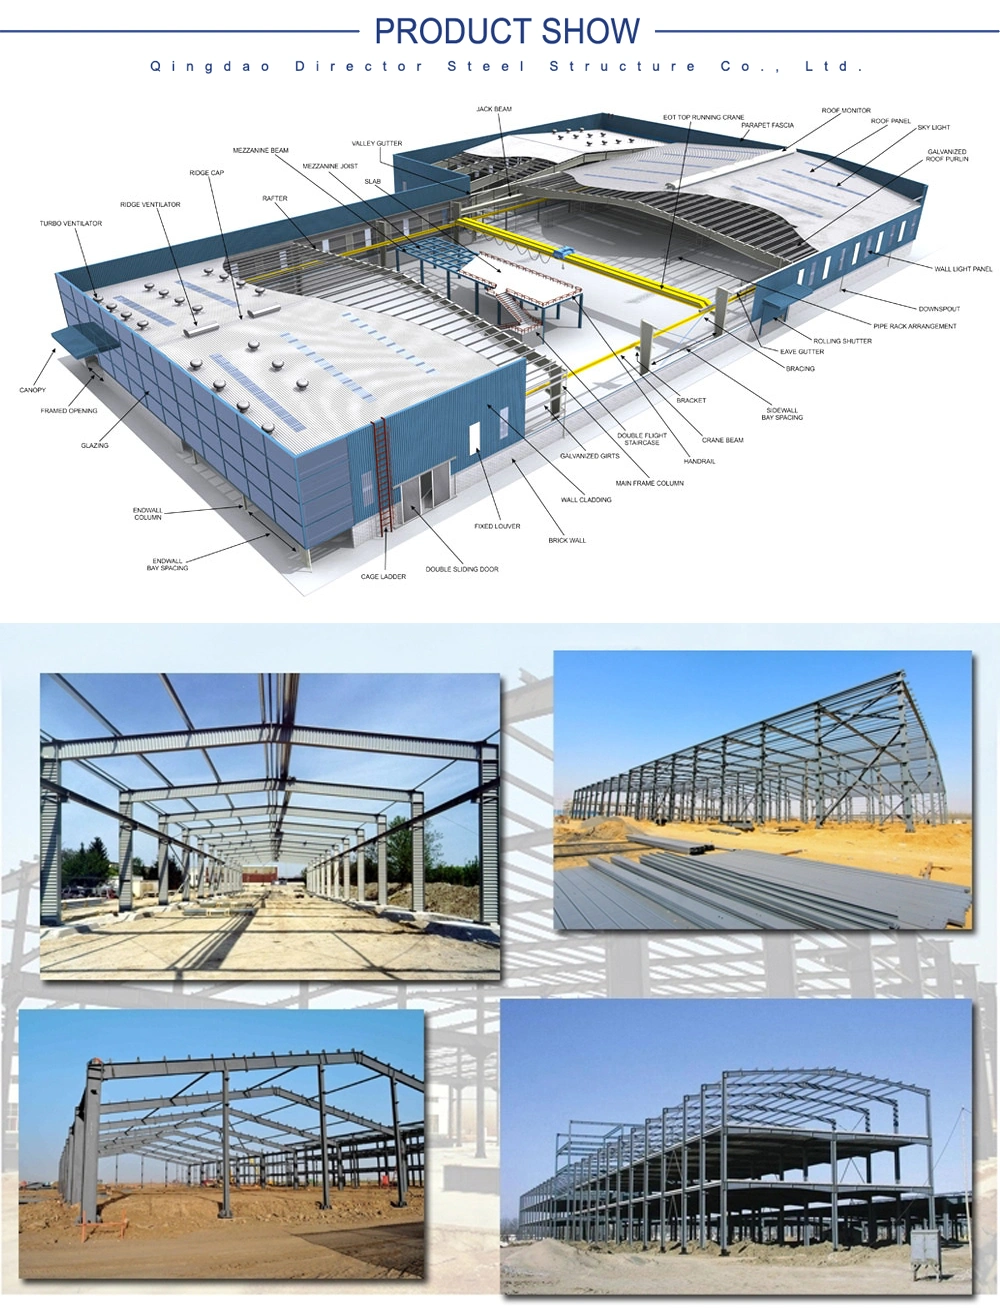 China Best Selling Steel Structure Supplier Layer Chicken Building Metal Shed Poultry Farm House Design